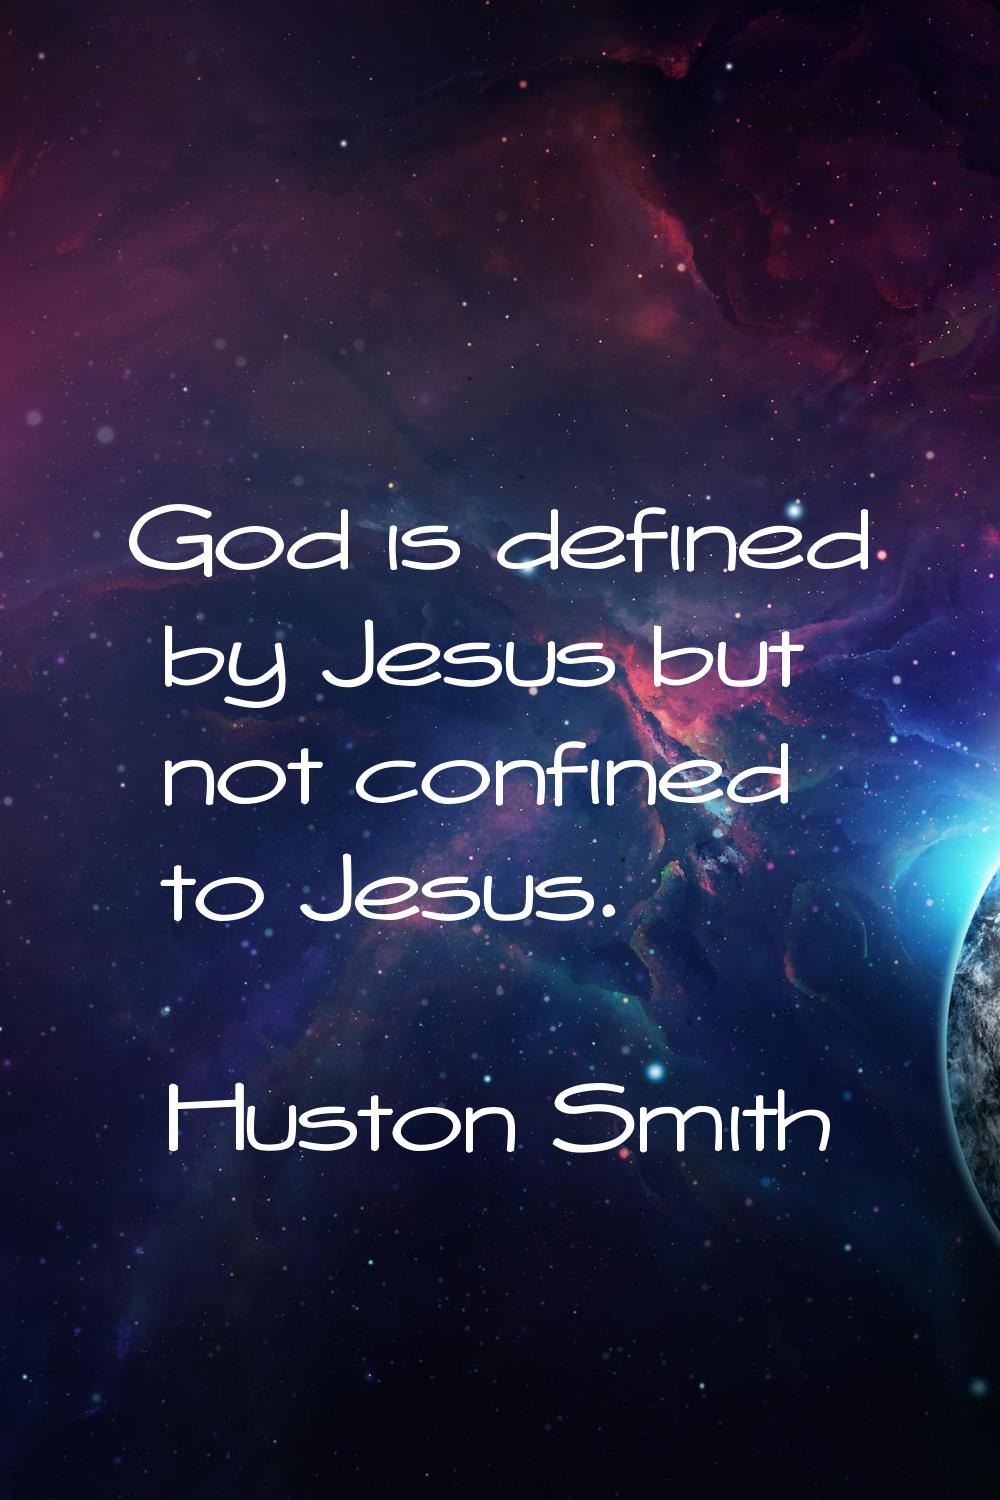 God is defined by Jesus but not confined to Jesus.